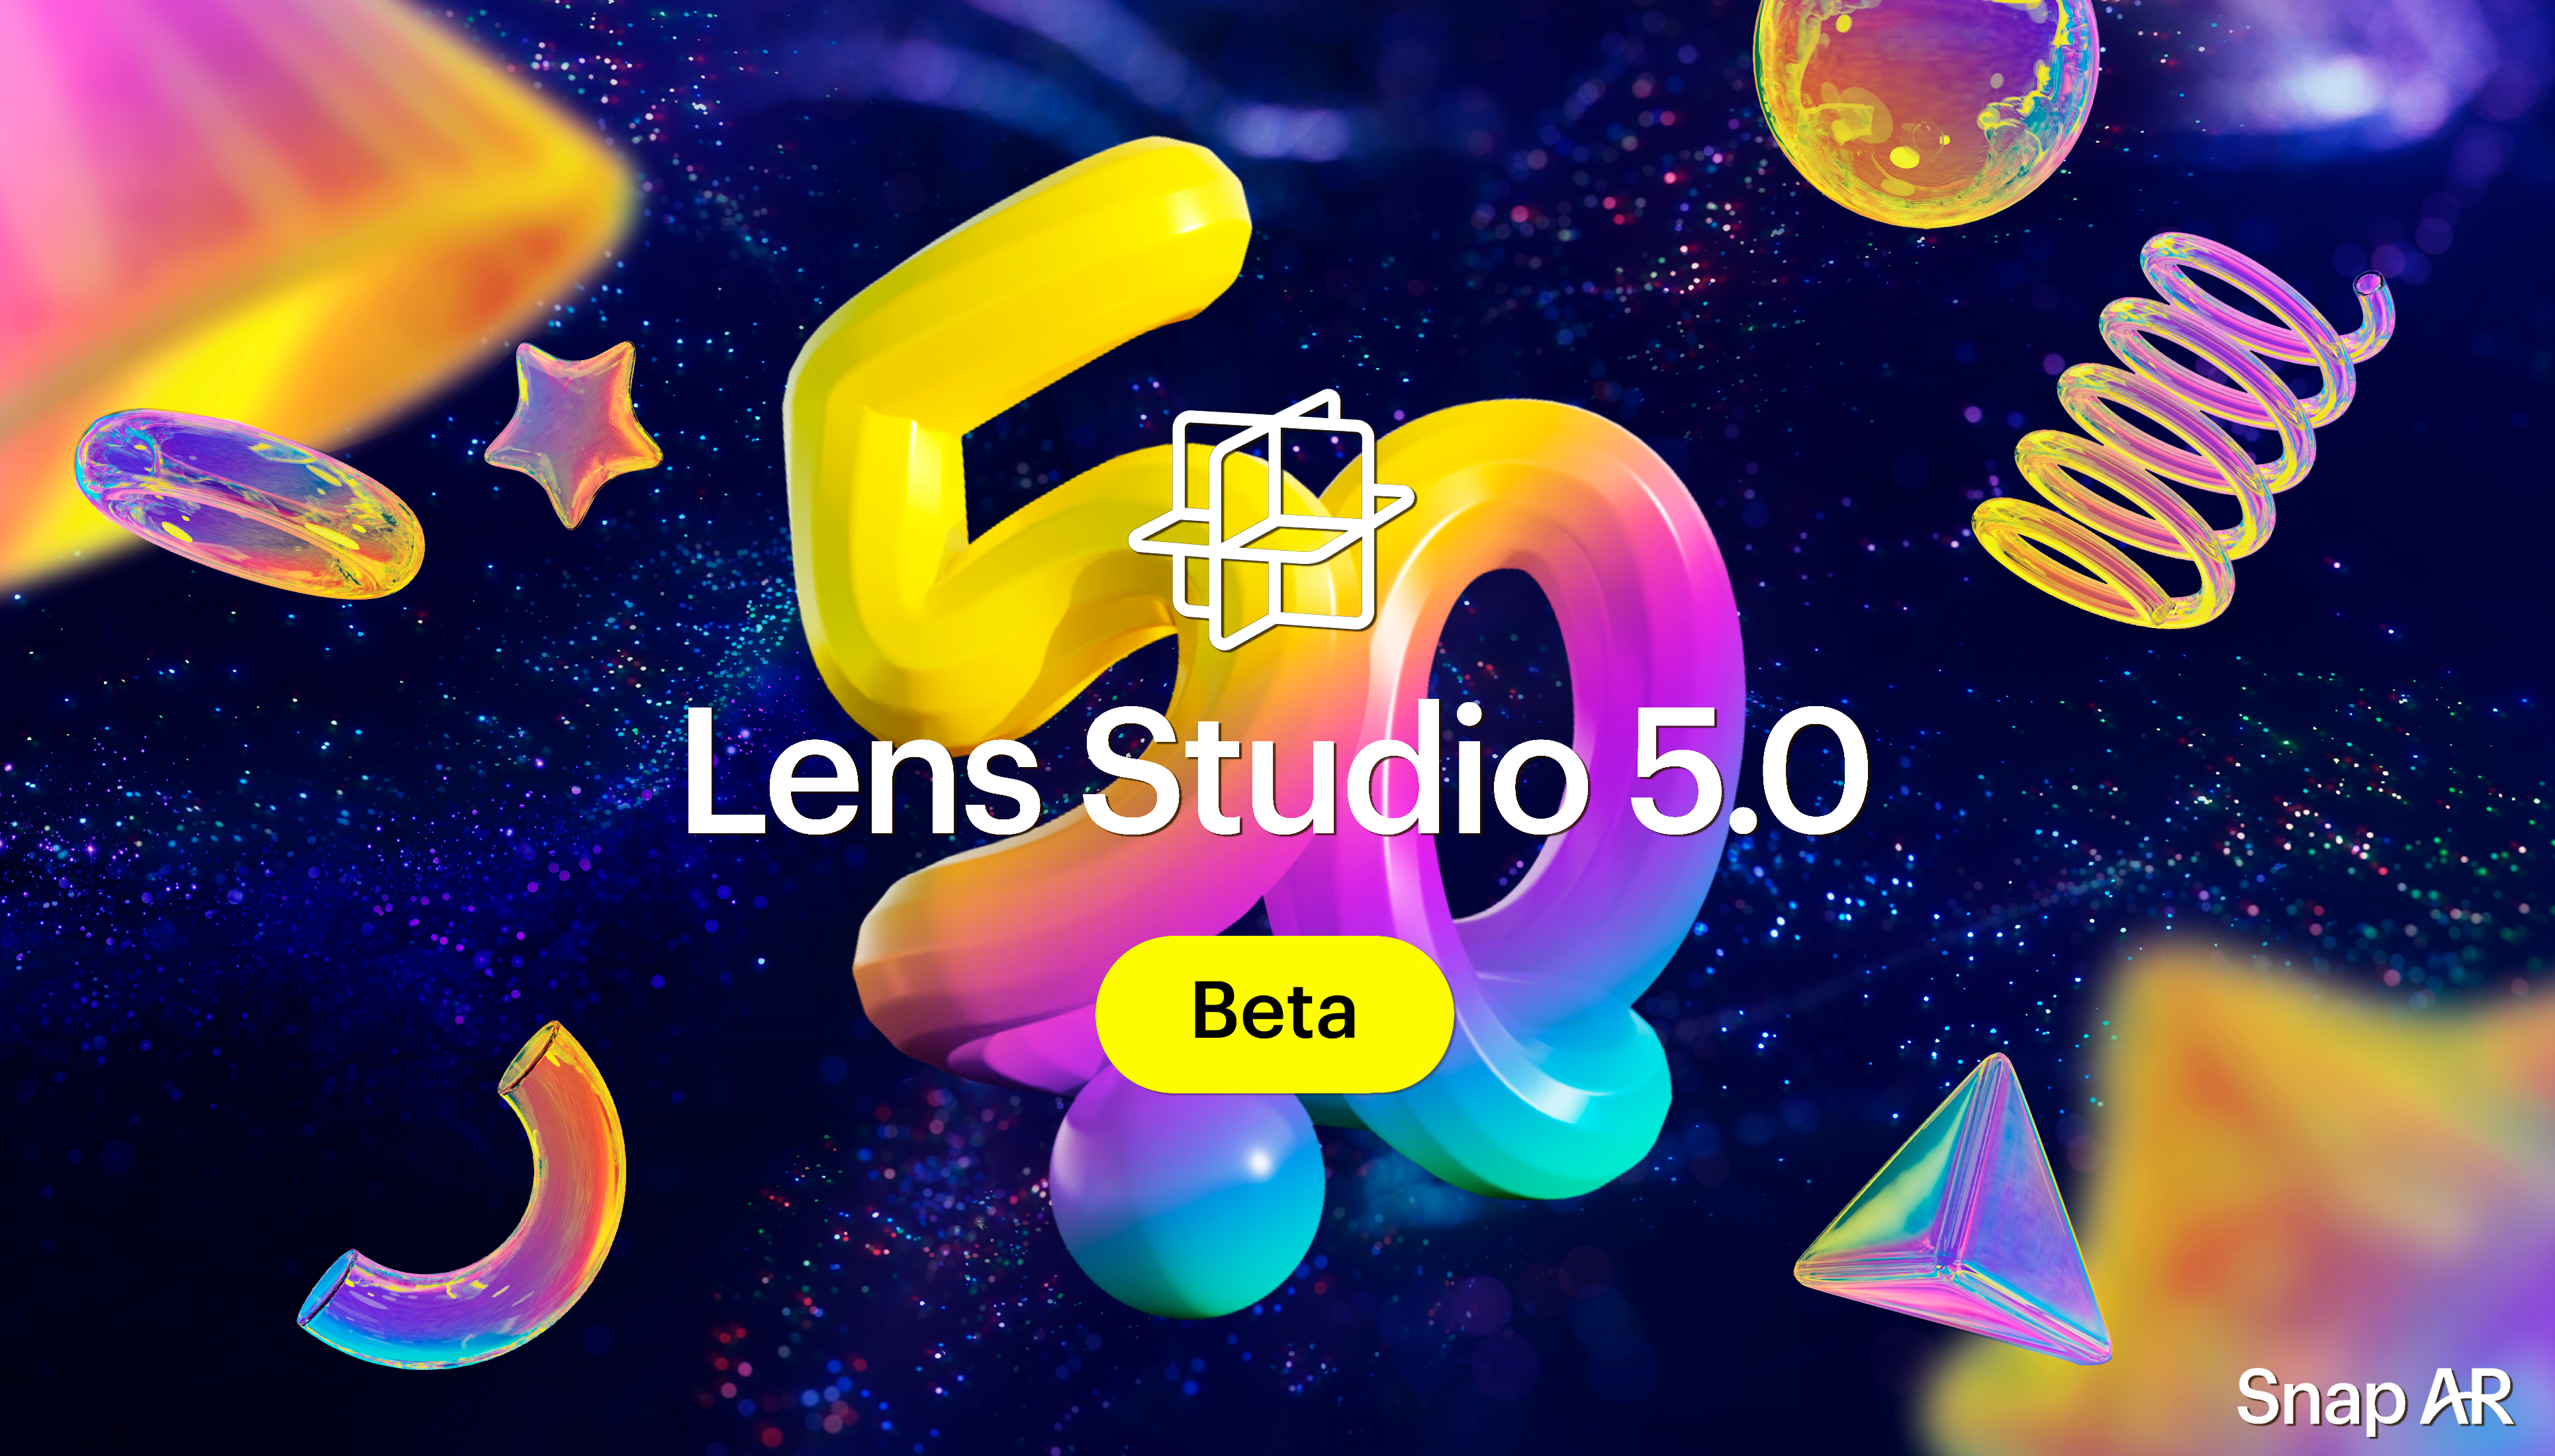 Snap launches generative AI lenses that create AR effects based on text